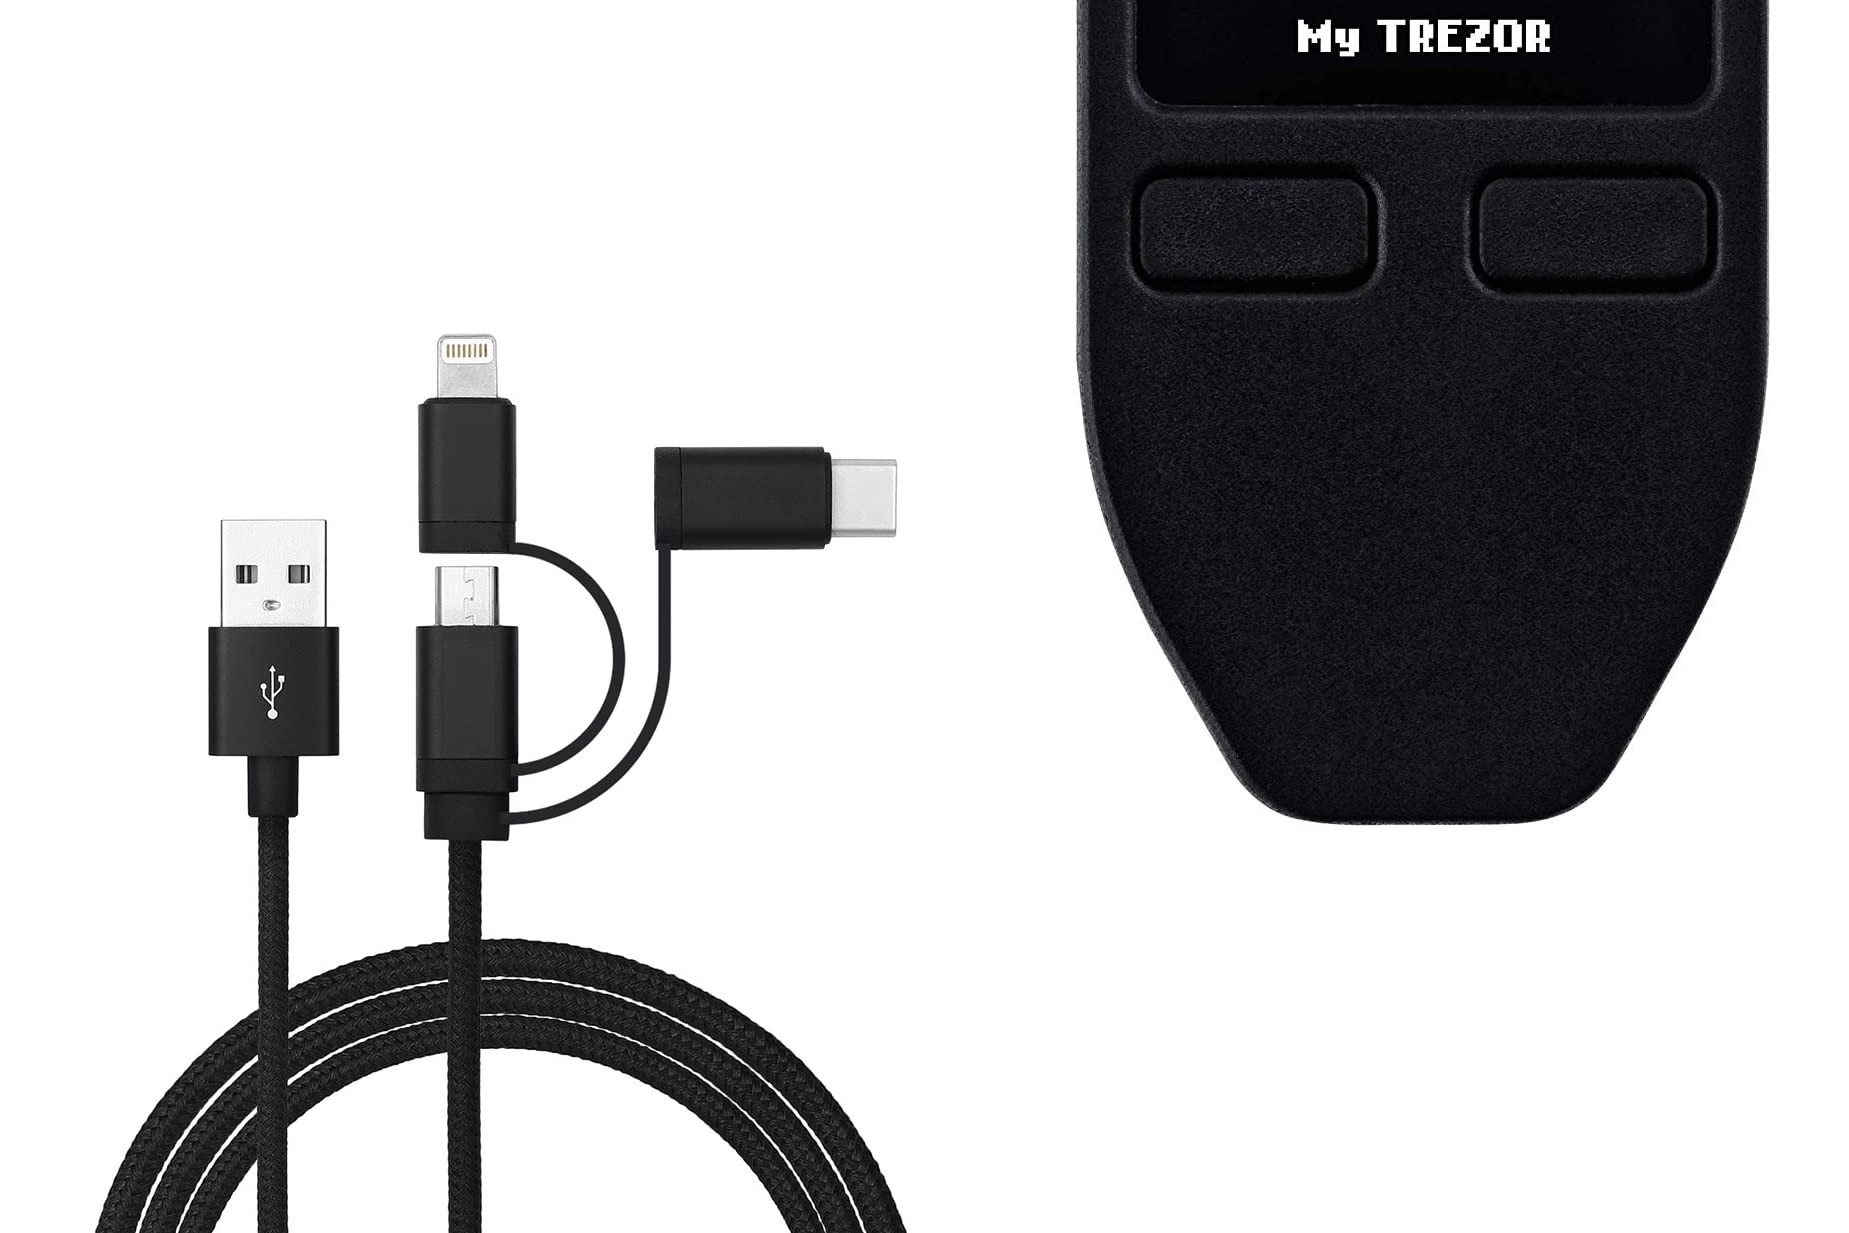 What Kind Of Cord Does The Trezor Use